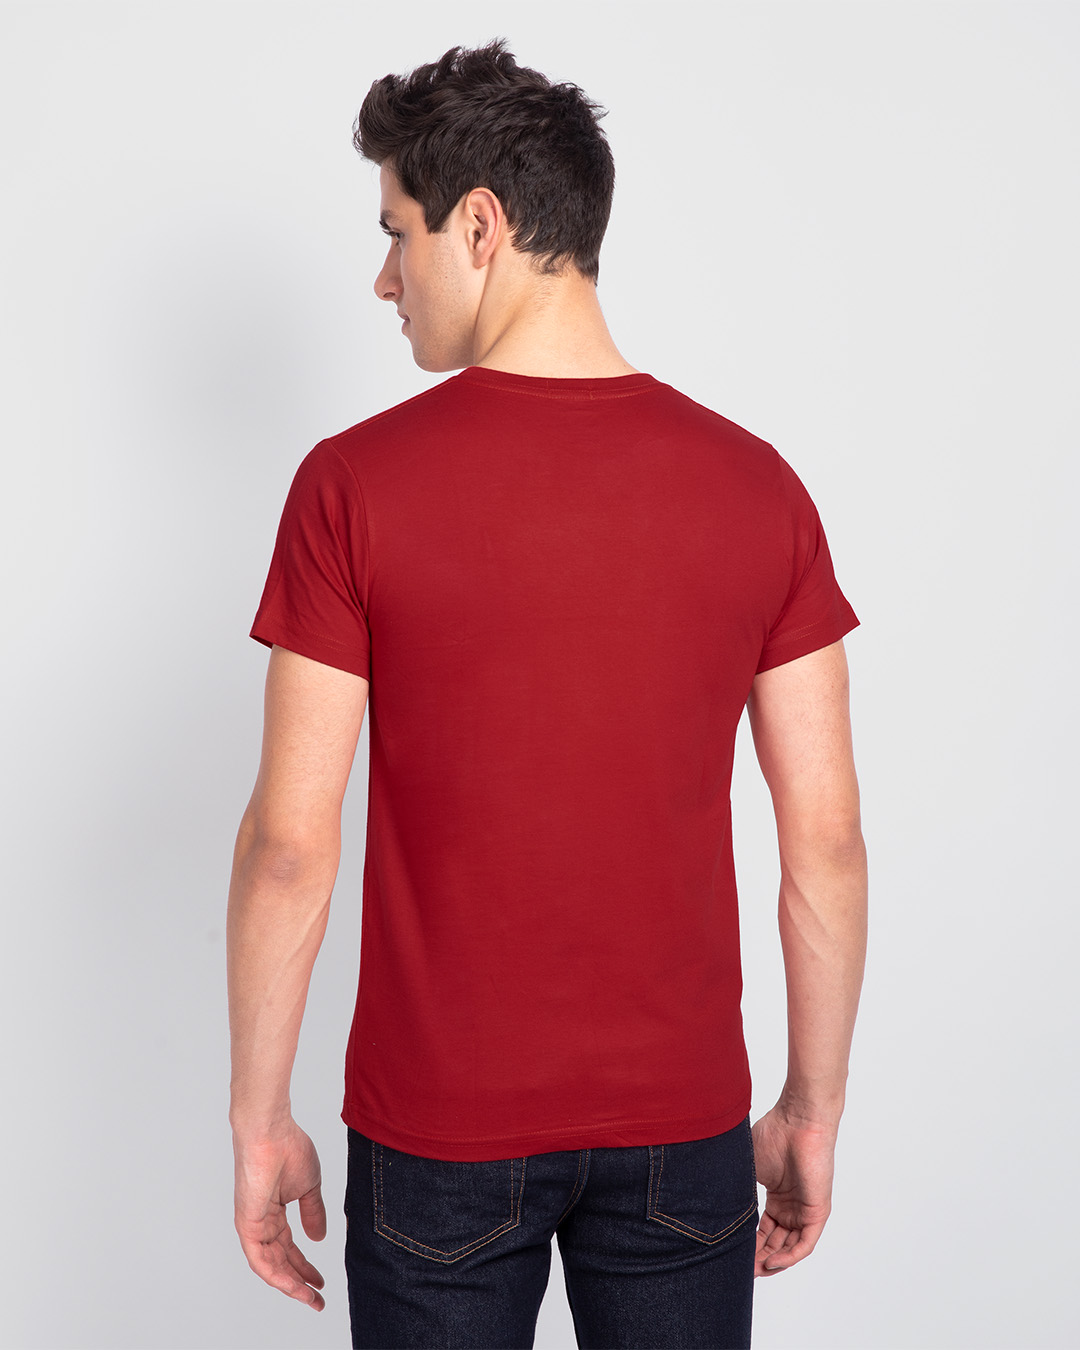 Shop Escape to outdoors Half Sleeve T-Shirt Bold Red-Back